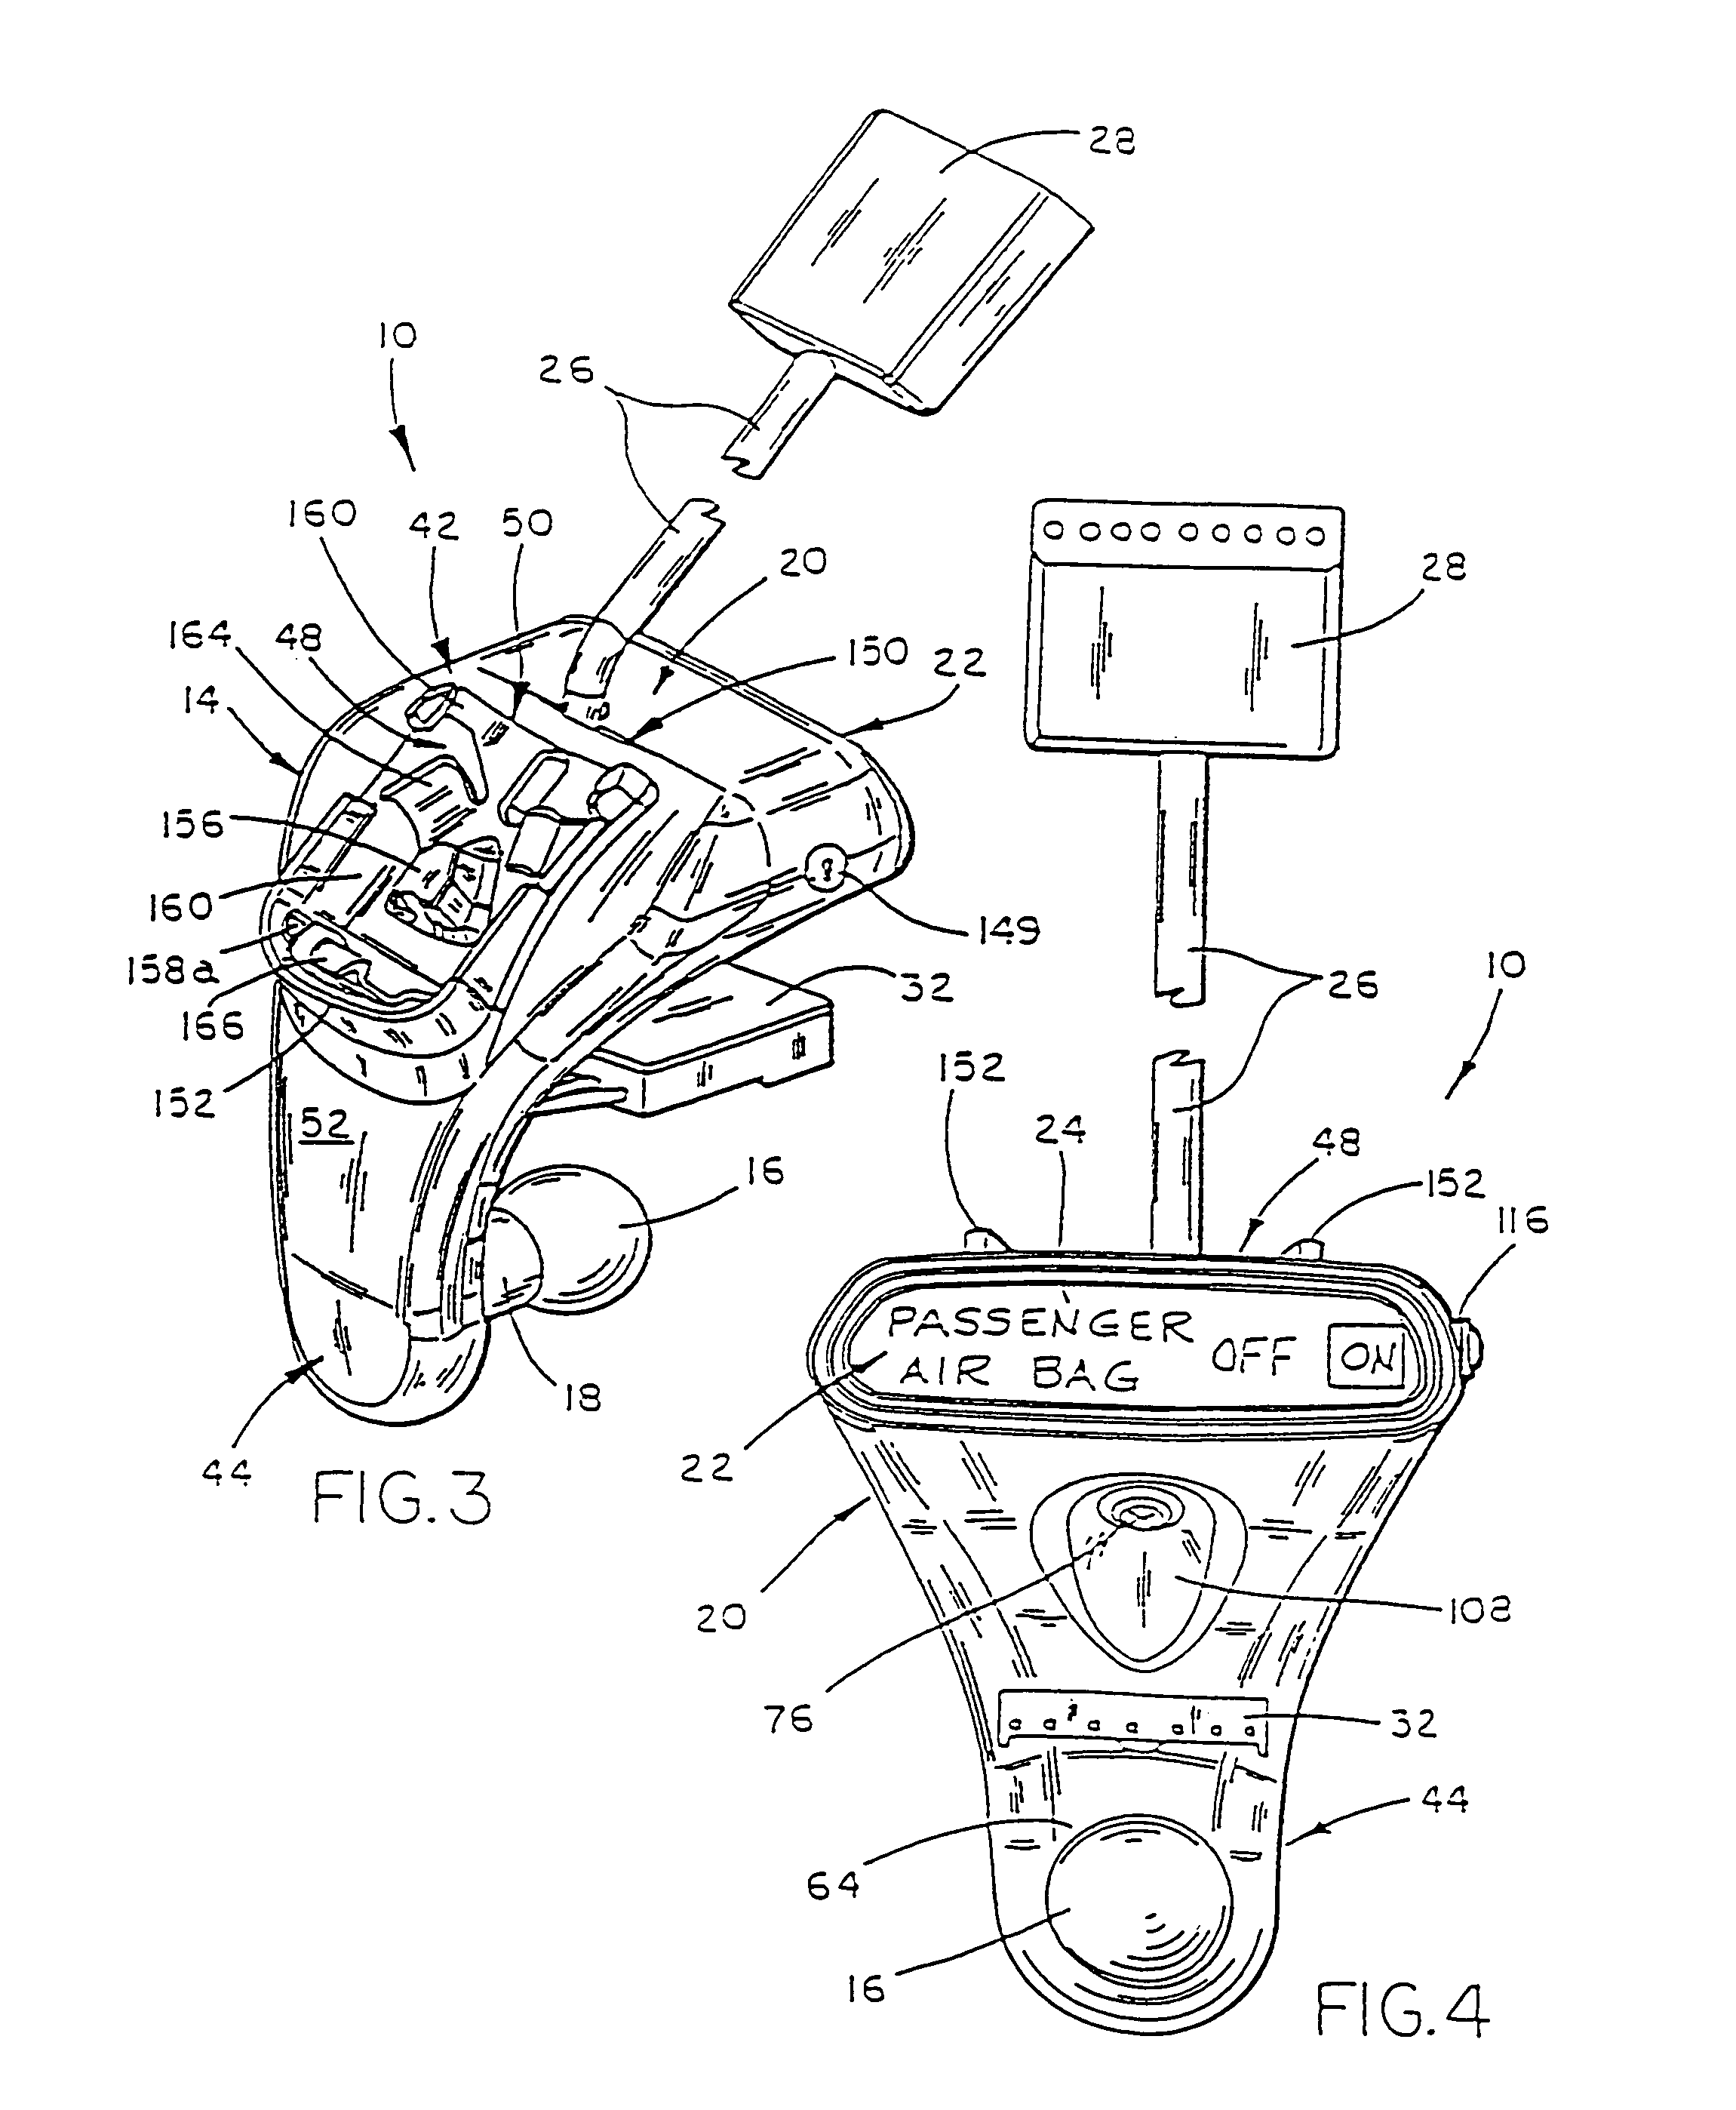 Rearview mirror assembly incorporating accessories